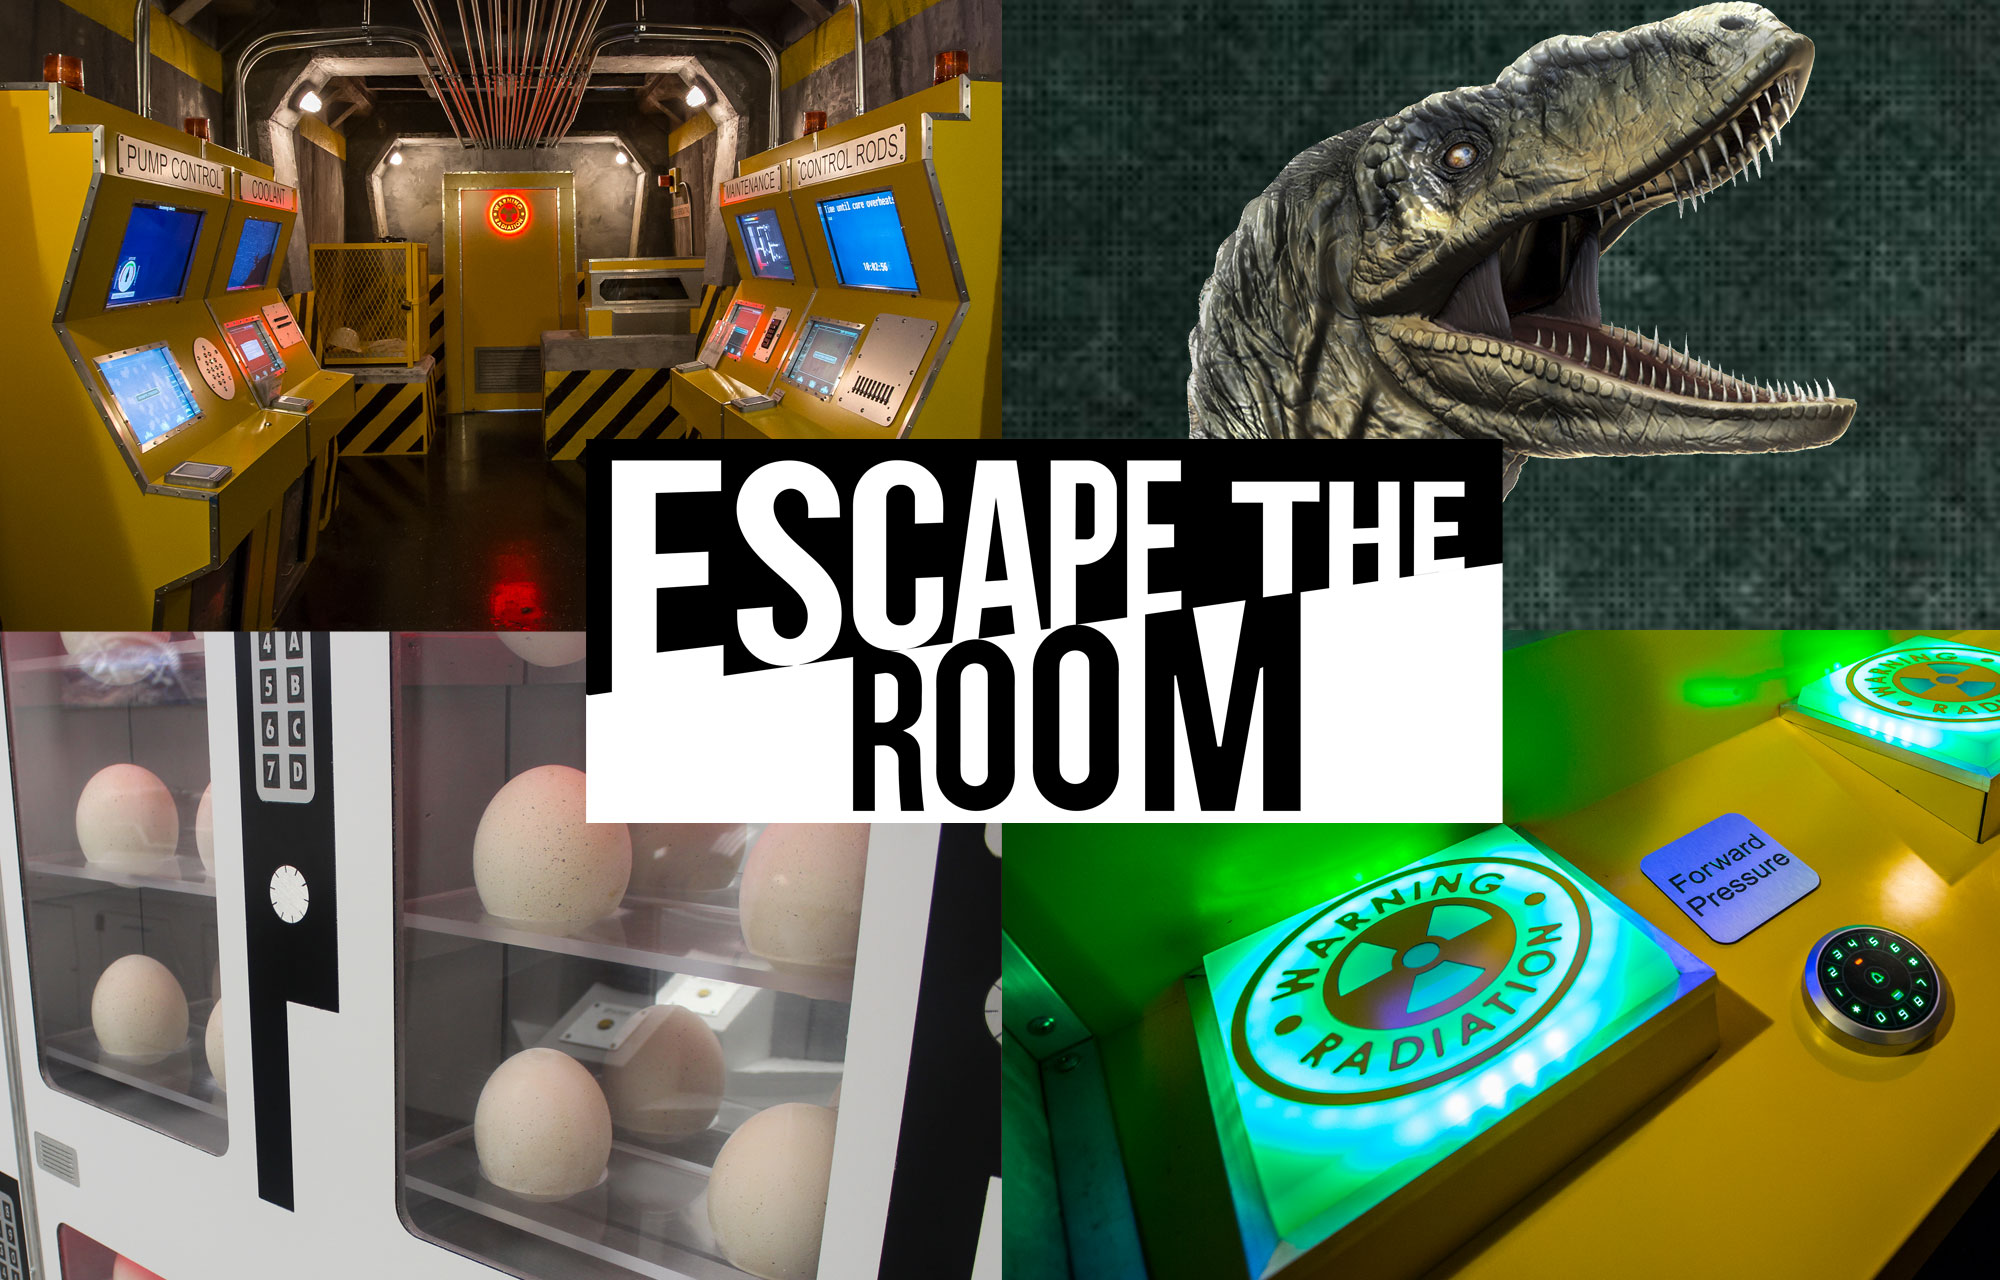 New 'Escape Room' movie: 5 real-life escape rooms in NYC